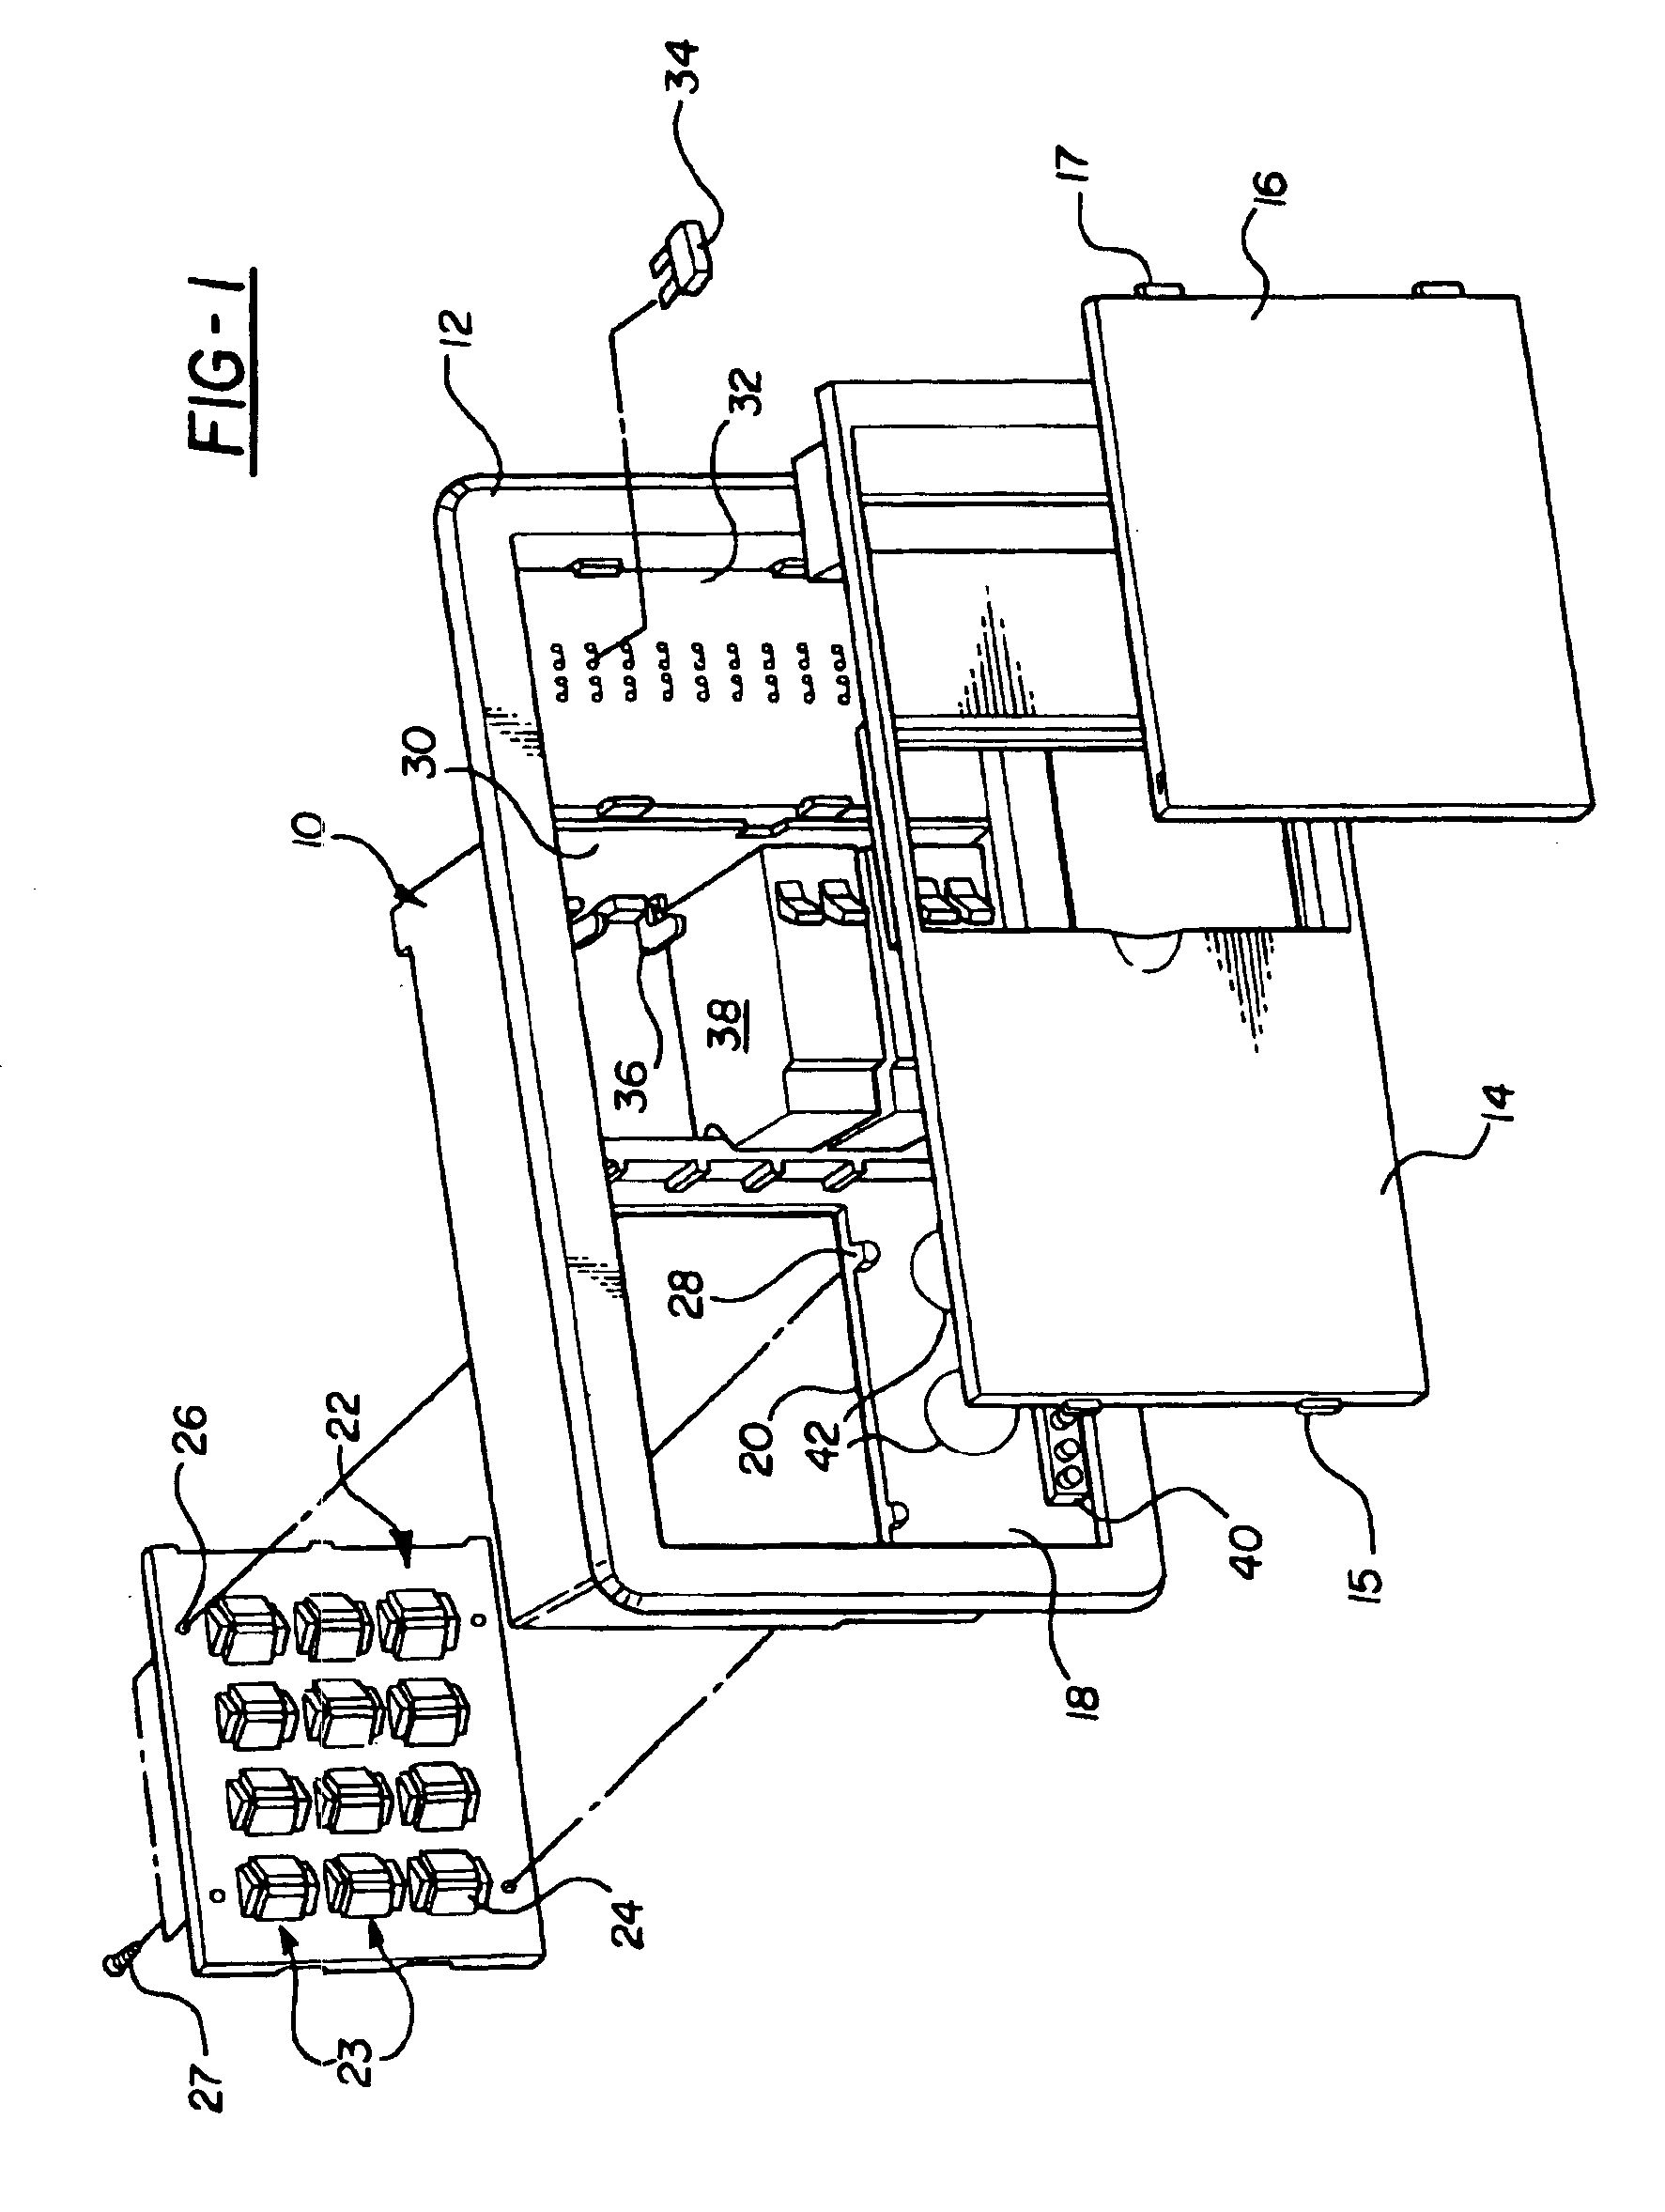 Electrical housing with non-integral cable outlet port member